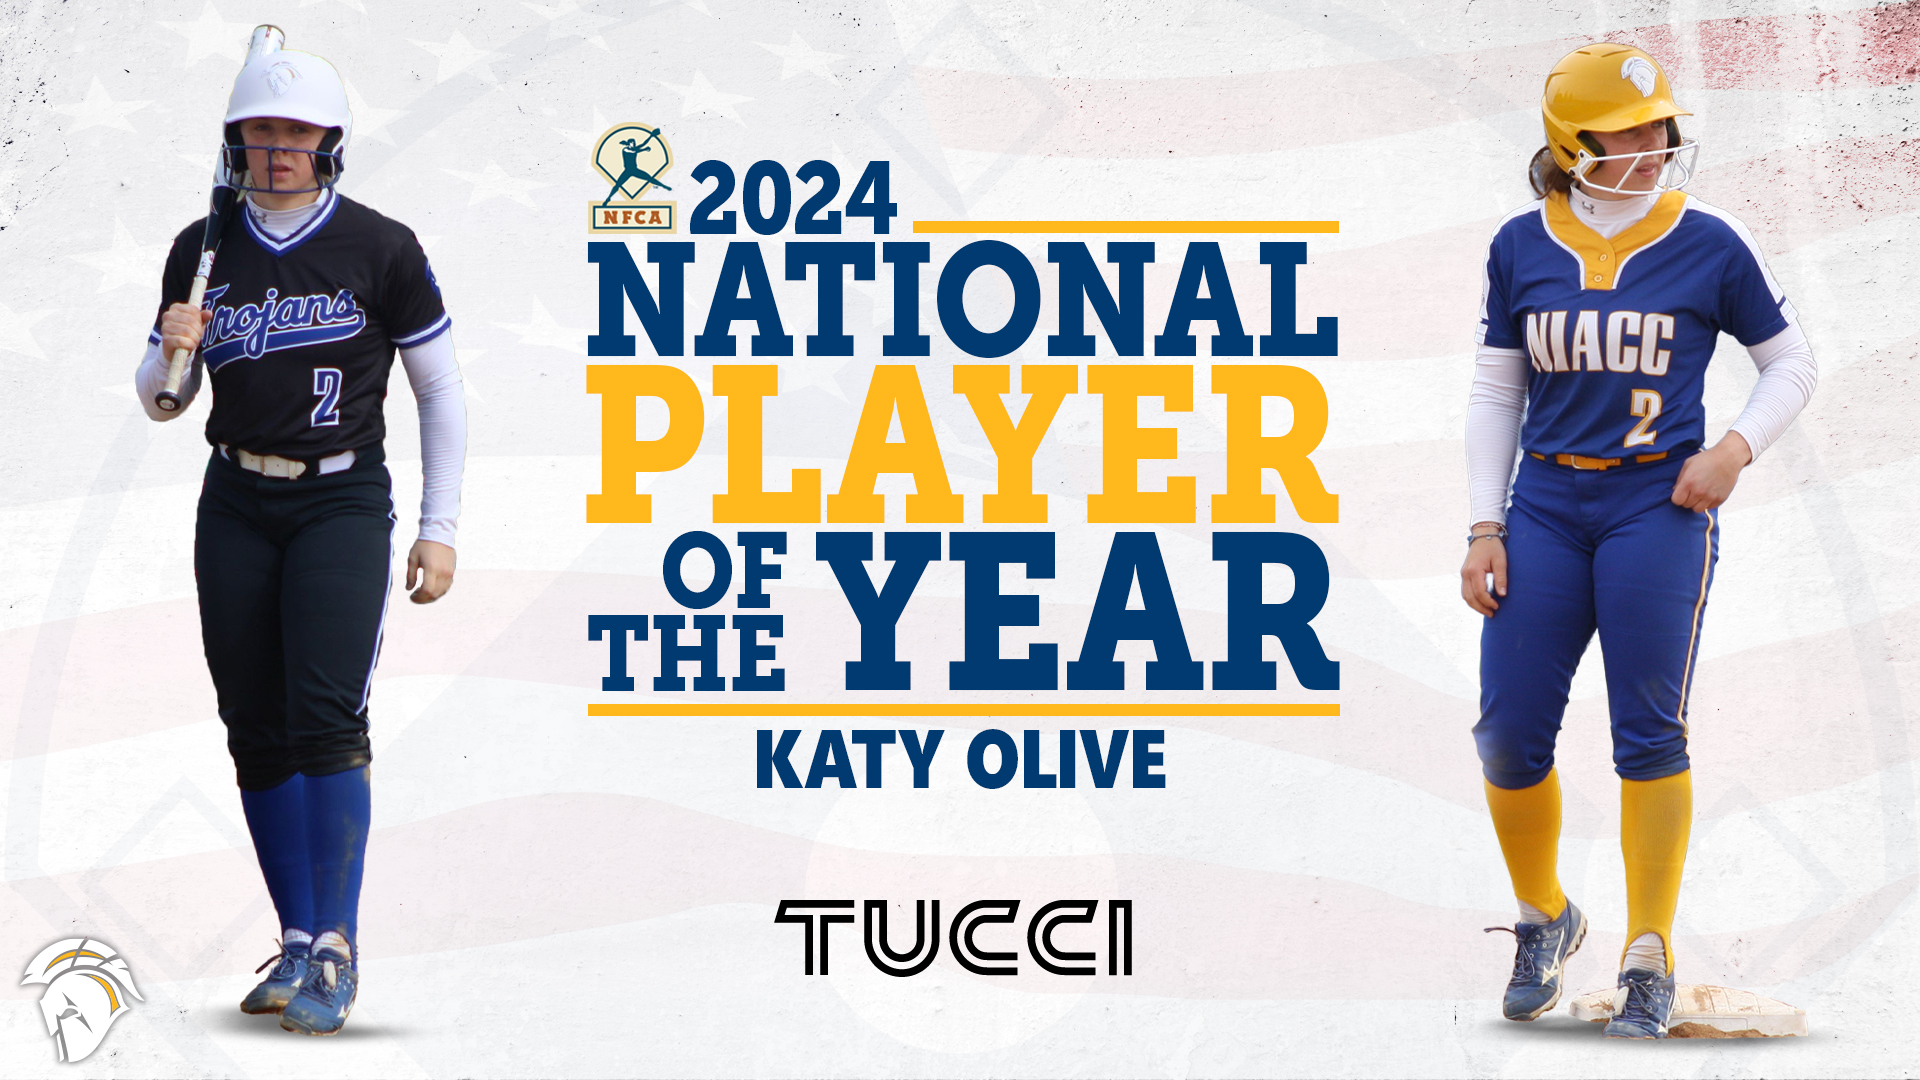 NIACC's Olive earns NFCA player of year honor